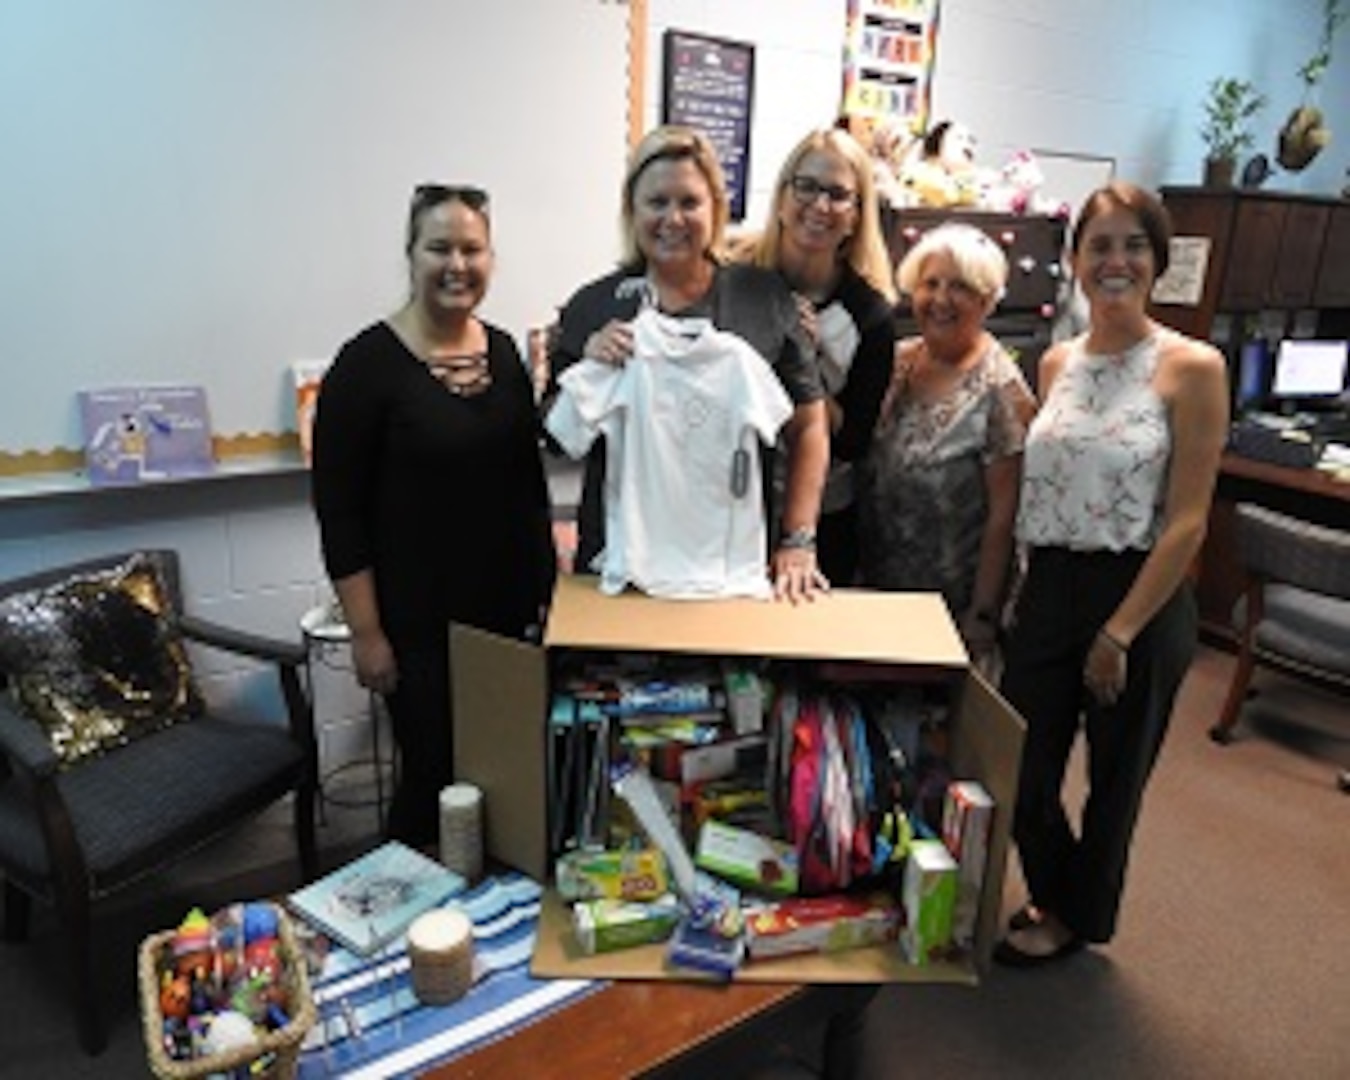 PANAMA CITY, Florida - Deniece Moss (center), principal at West Bay Elementary School poses with employees of Naval Surface Warfare Center Panama City Division’s (NSWC PCD) Test and Evaluation Prototype Fabrication Division. The group collected needed school supplies for Bay District School students in Panama City Beach, Florida August 13, 2018. Pictured from left to right: Nicole Waters, Deniece Moss, Michelle Armistead, Paula Oliver, and Halie Cameron. U.S. Navy photo by Susan H. Lawson